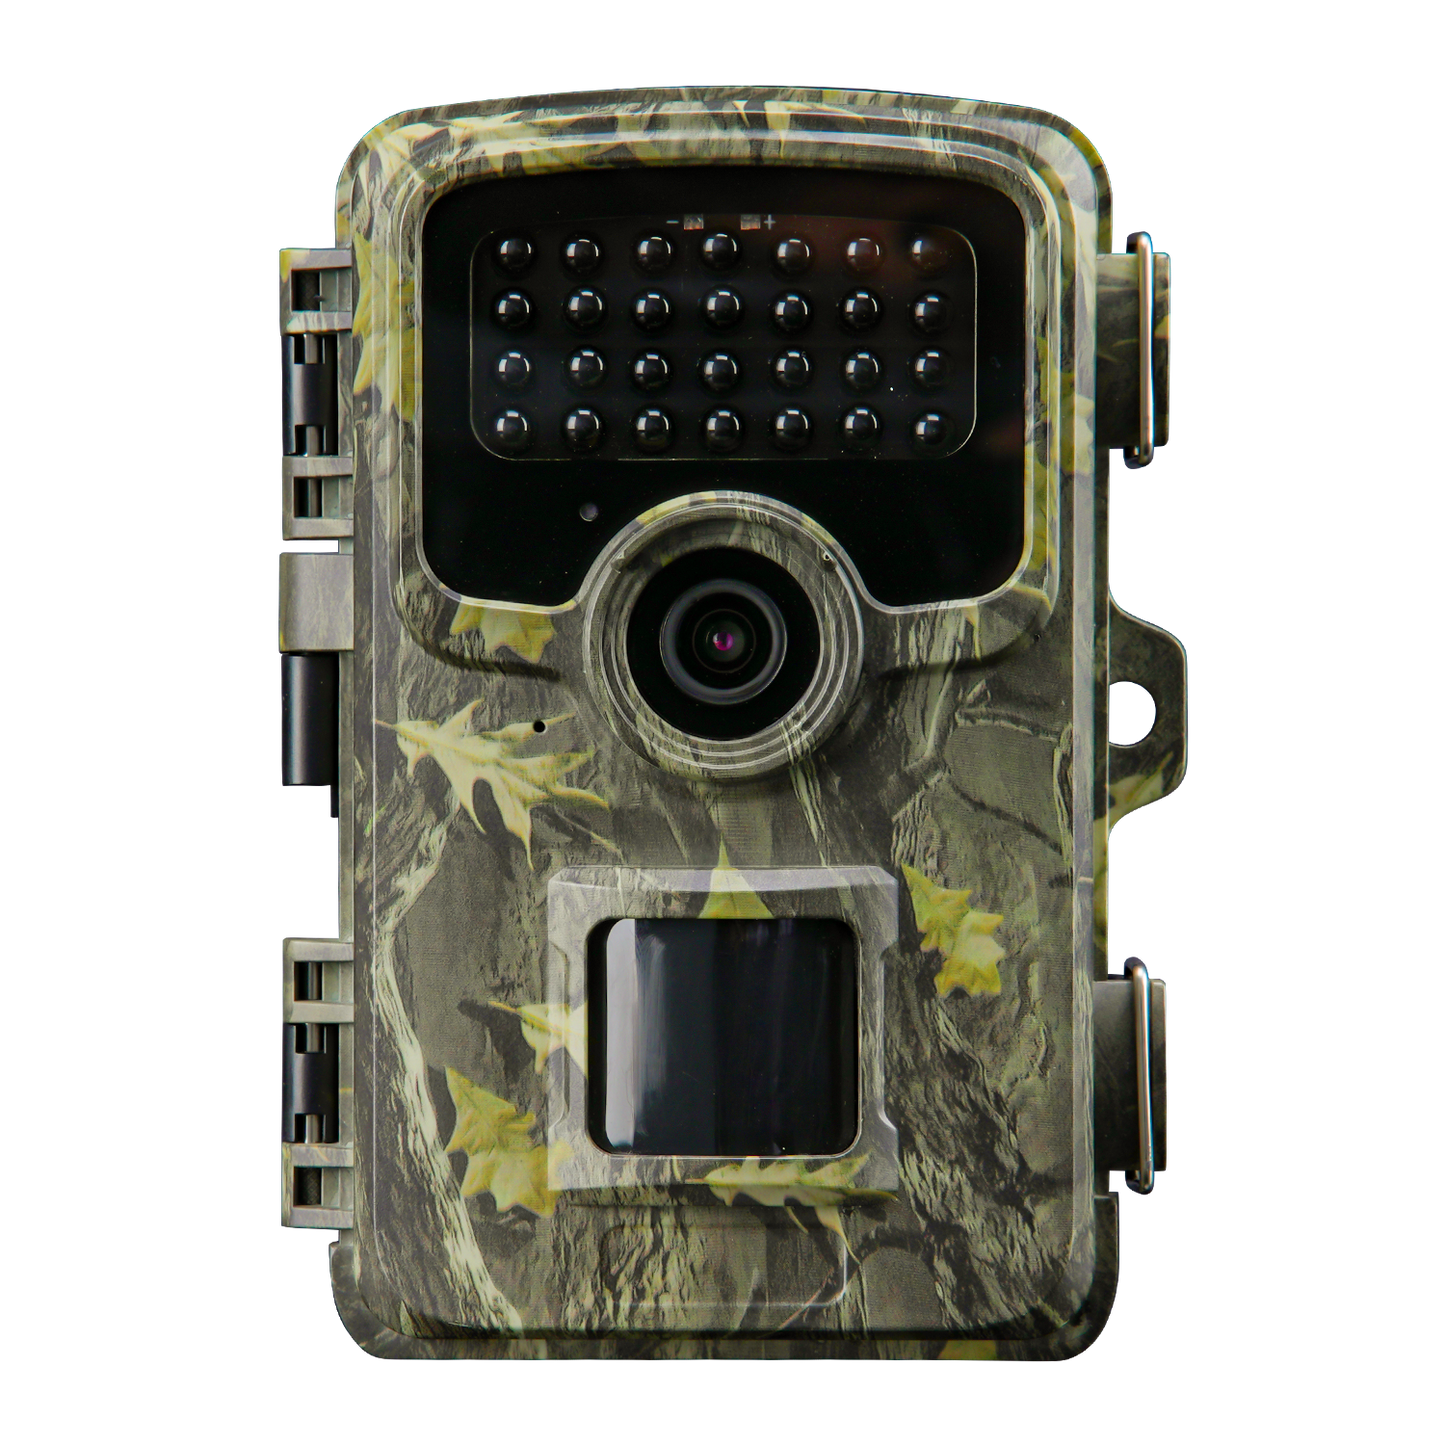 Coolife PH830 Trail Camera, 32MP 1520K High-Resolution Hunting Camera with Night Vision for Outdoor Wildlife